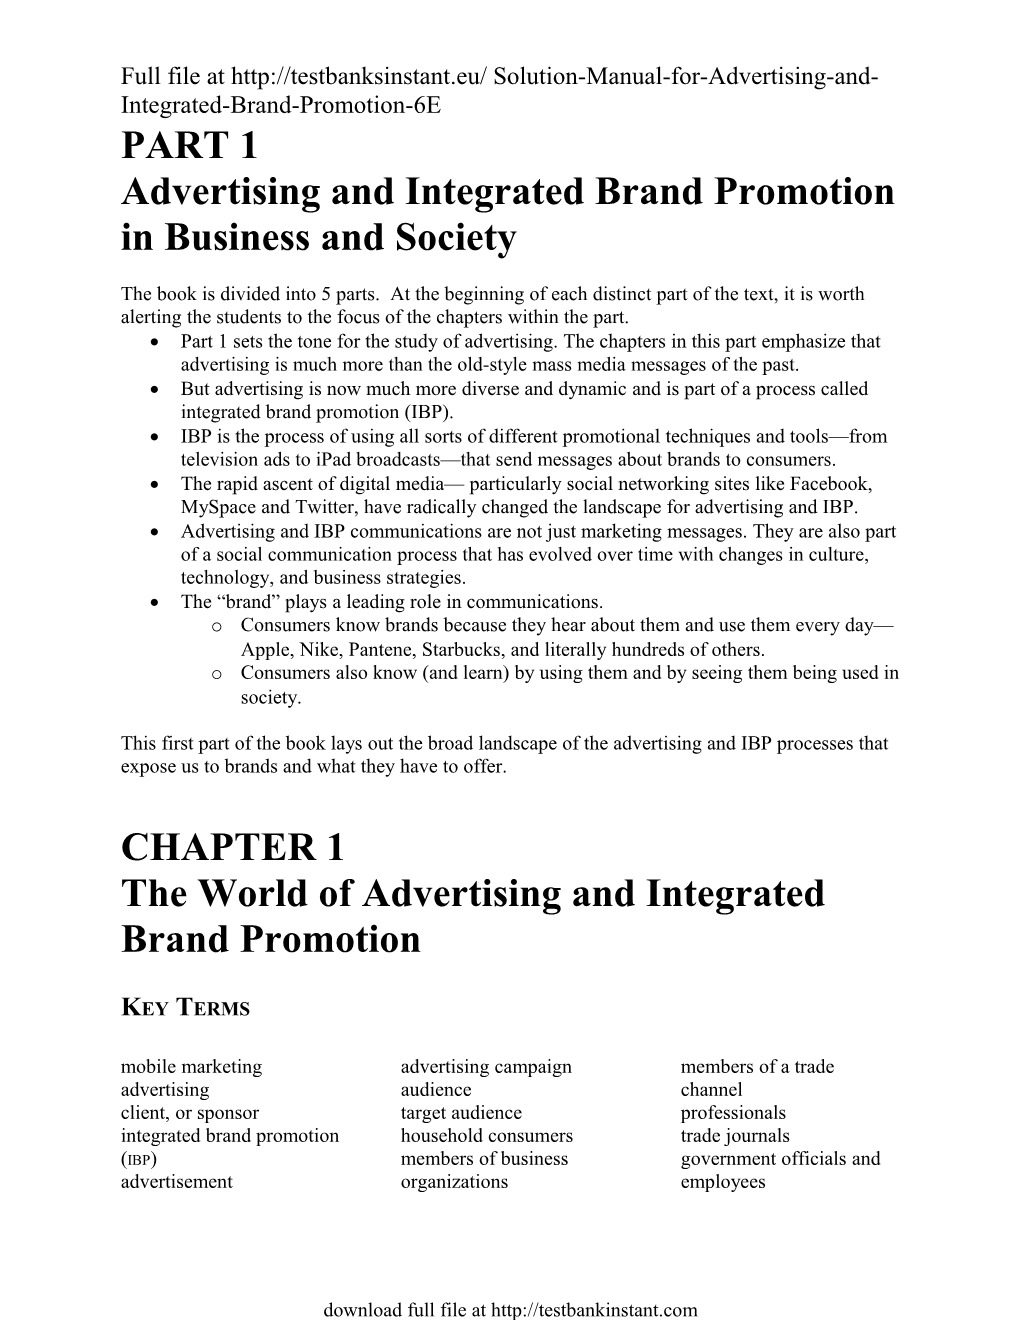 Advertising and Integrated Brand Promotion in Business and Society